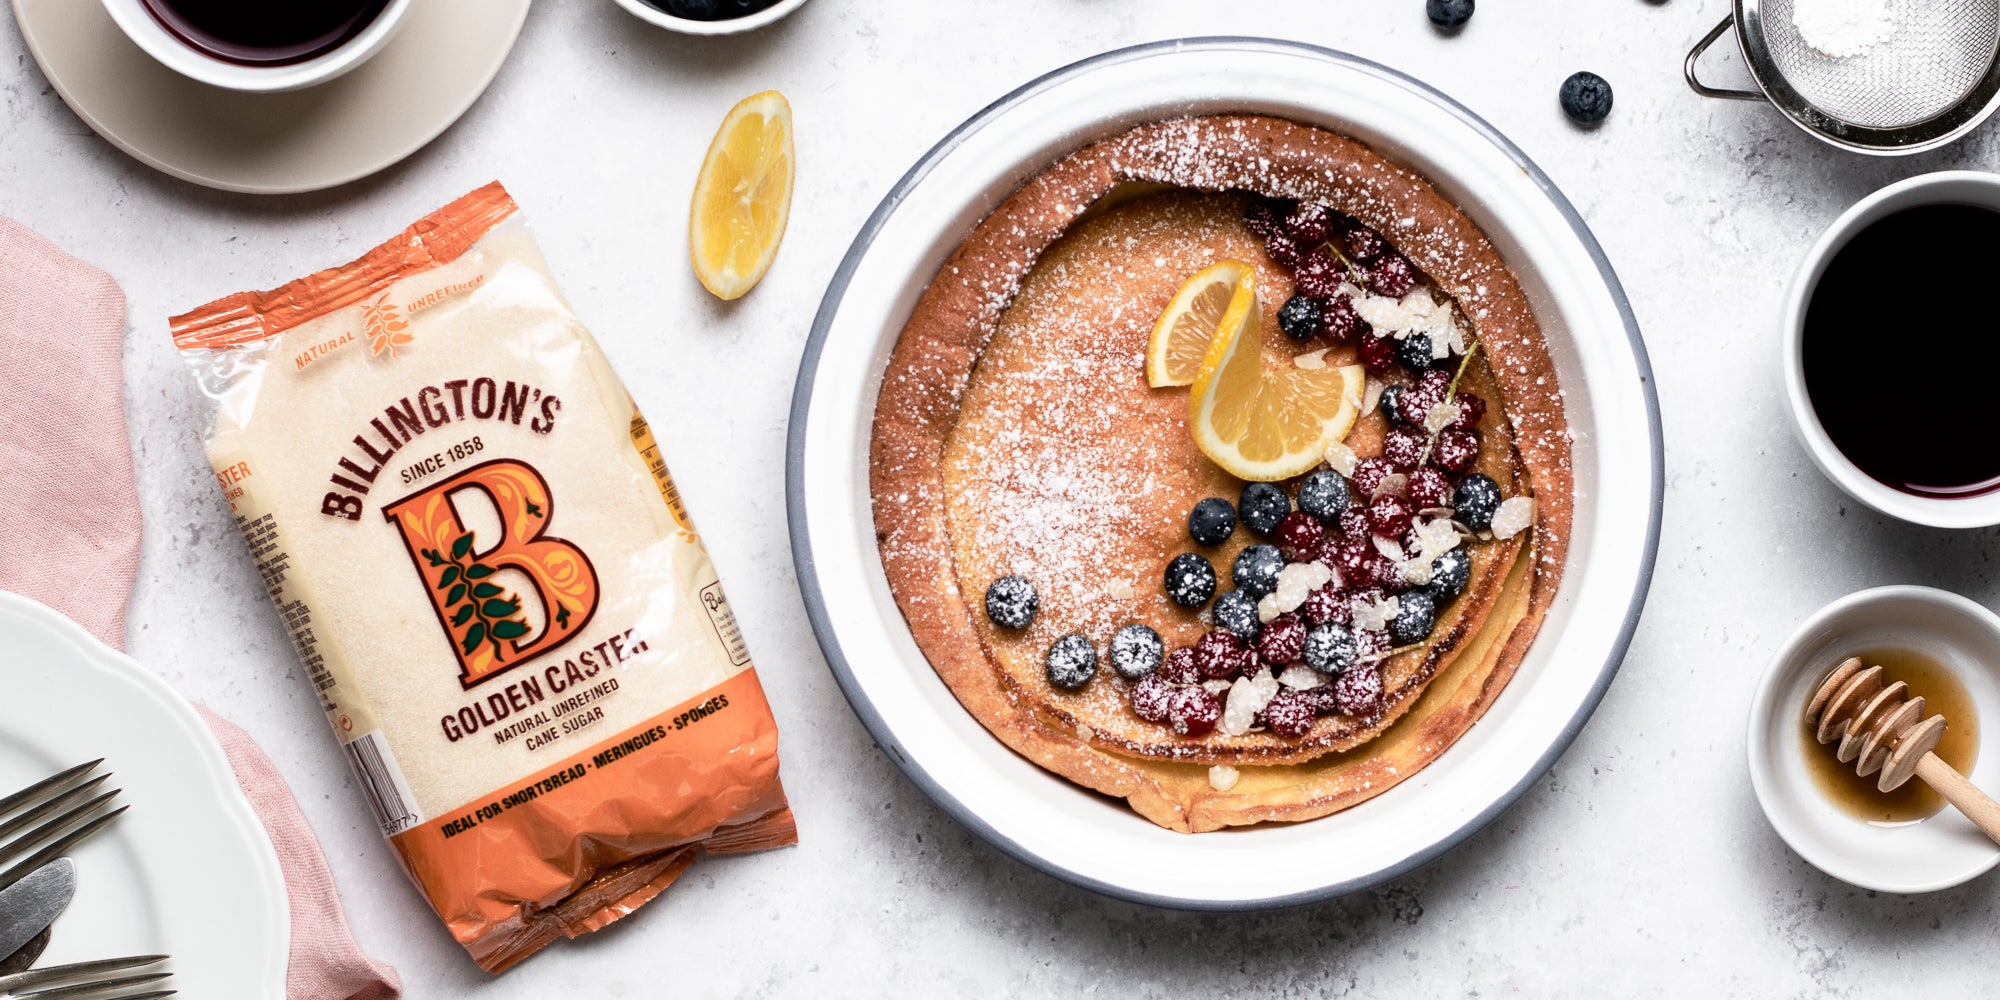 Stack of Dutch Baby Pancakes drizzled in honey, berries and lemon, next to a pack of Billington's Golden Caster Sugar 